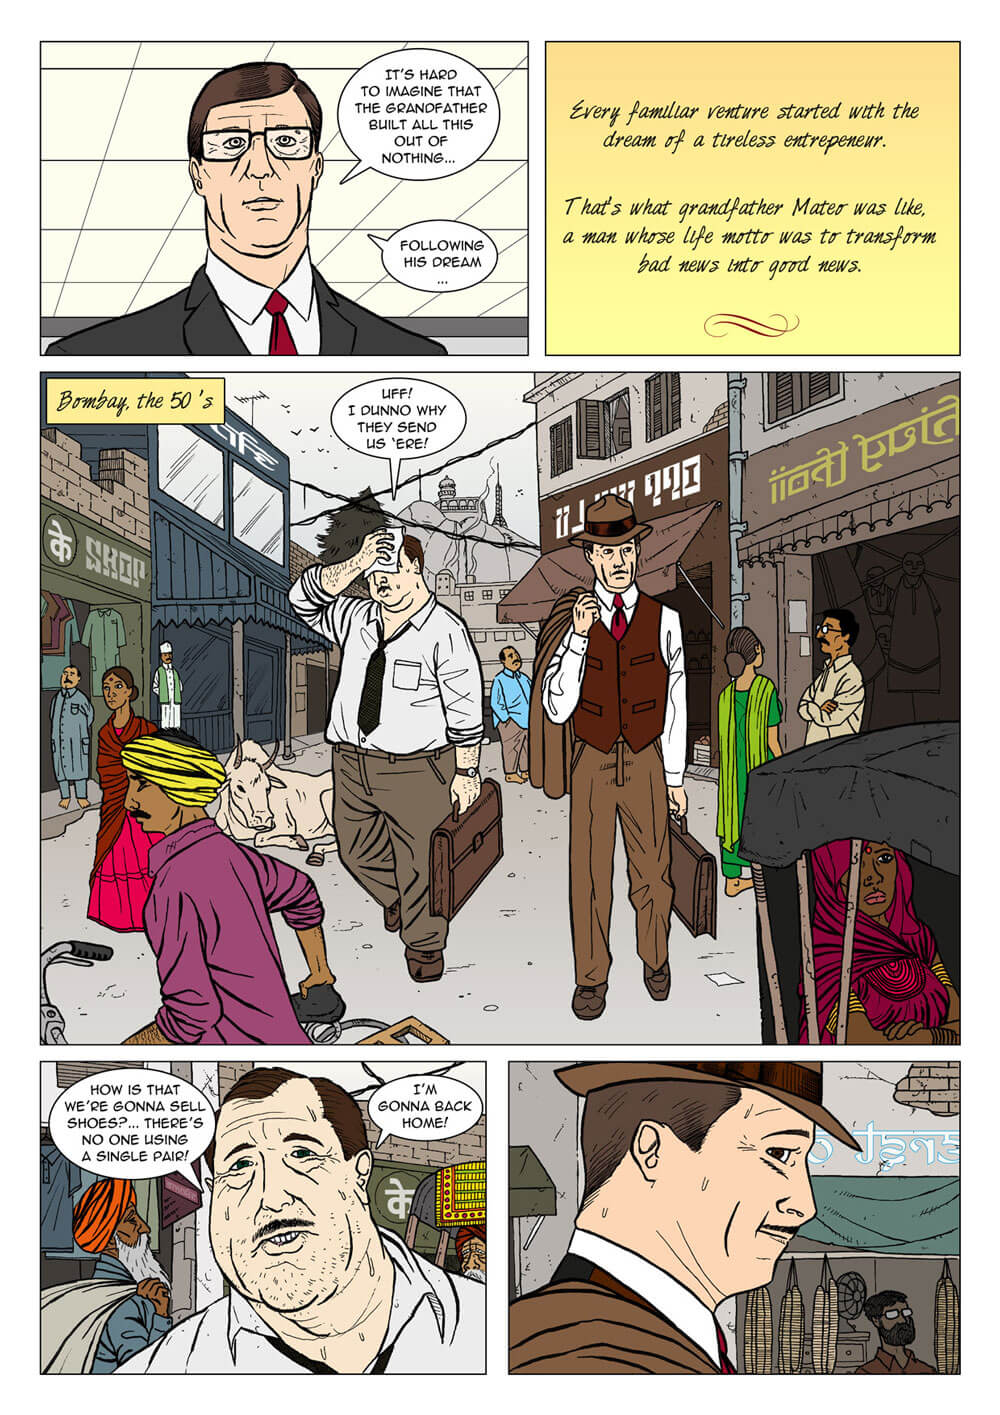 Archipielago produces comics to illustrate family business stories.